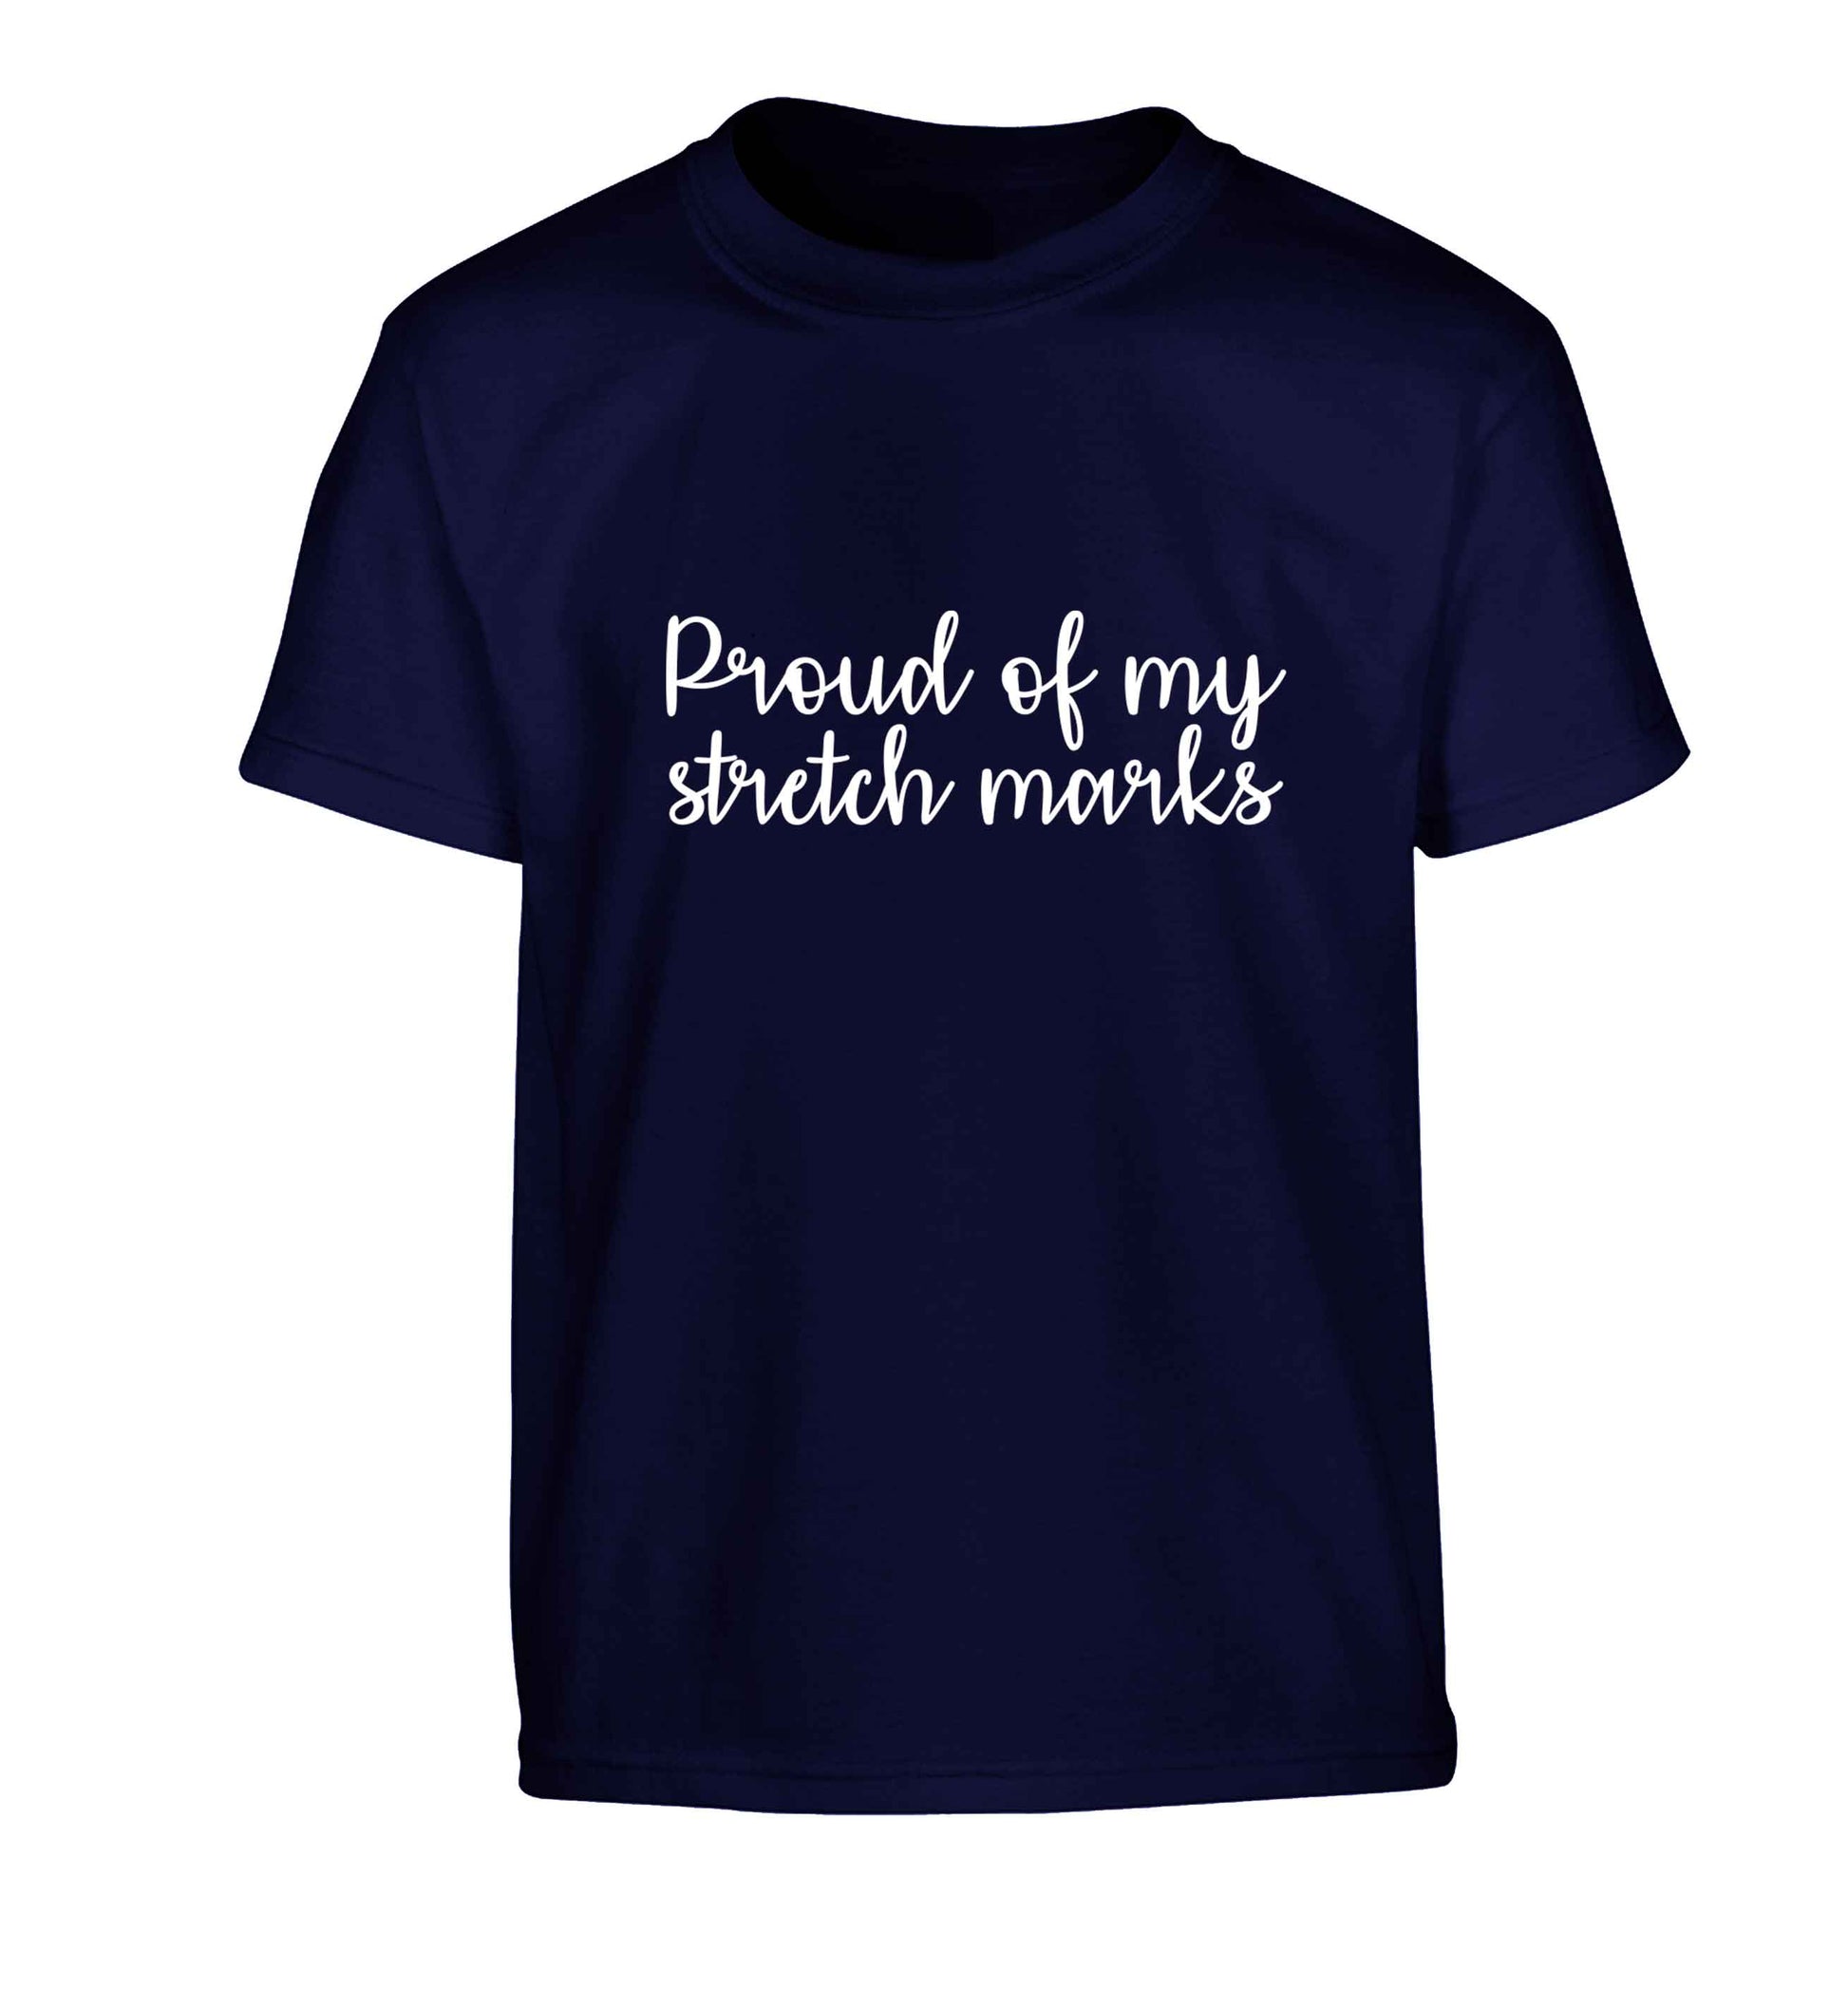 Proud of my stretch marks Children's navy Tshirt 12-13 Years